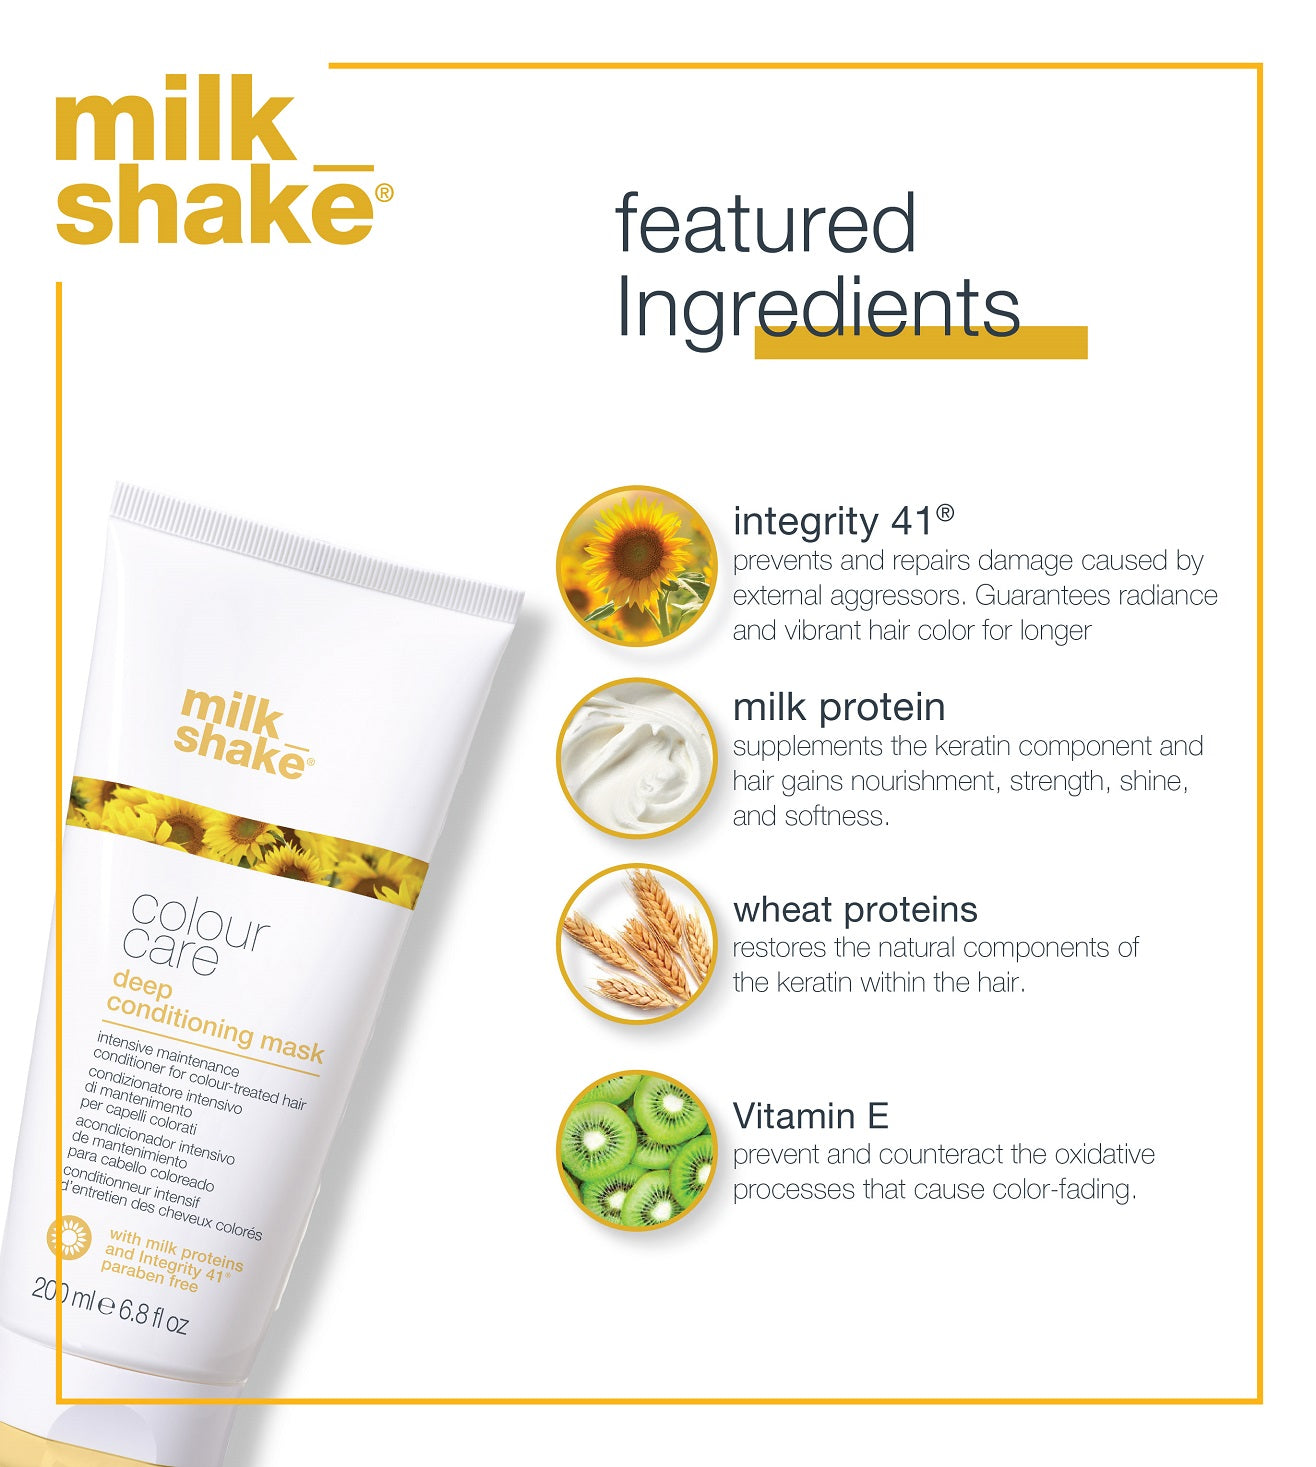 milk_shake colour care deep conditioning mask